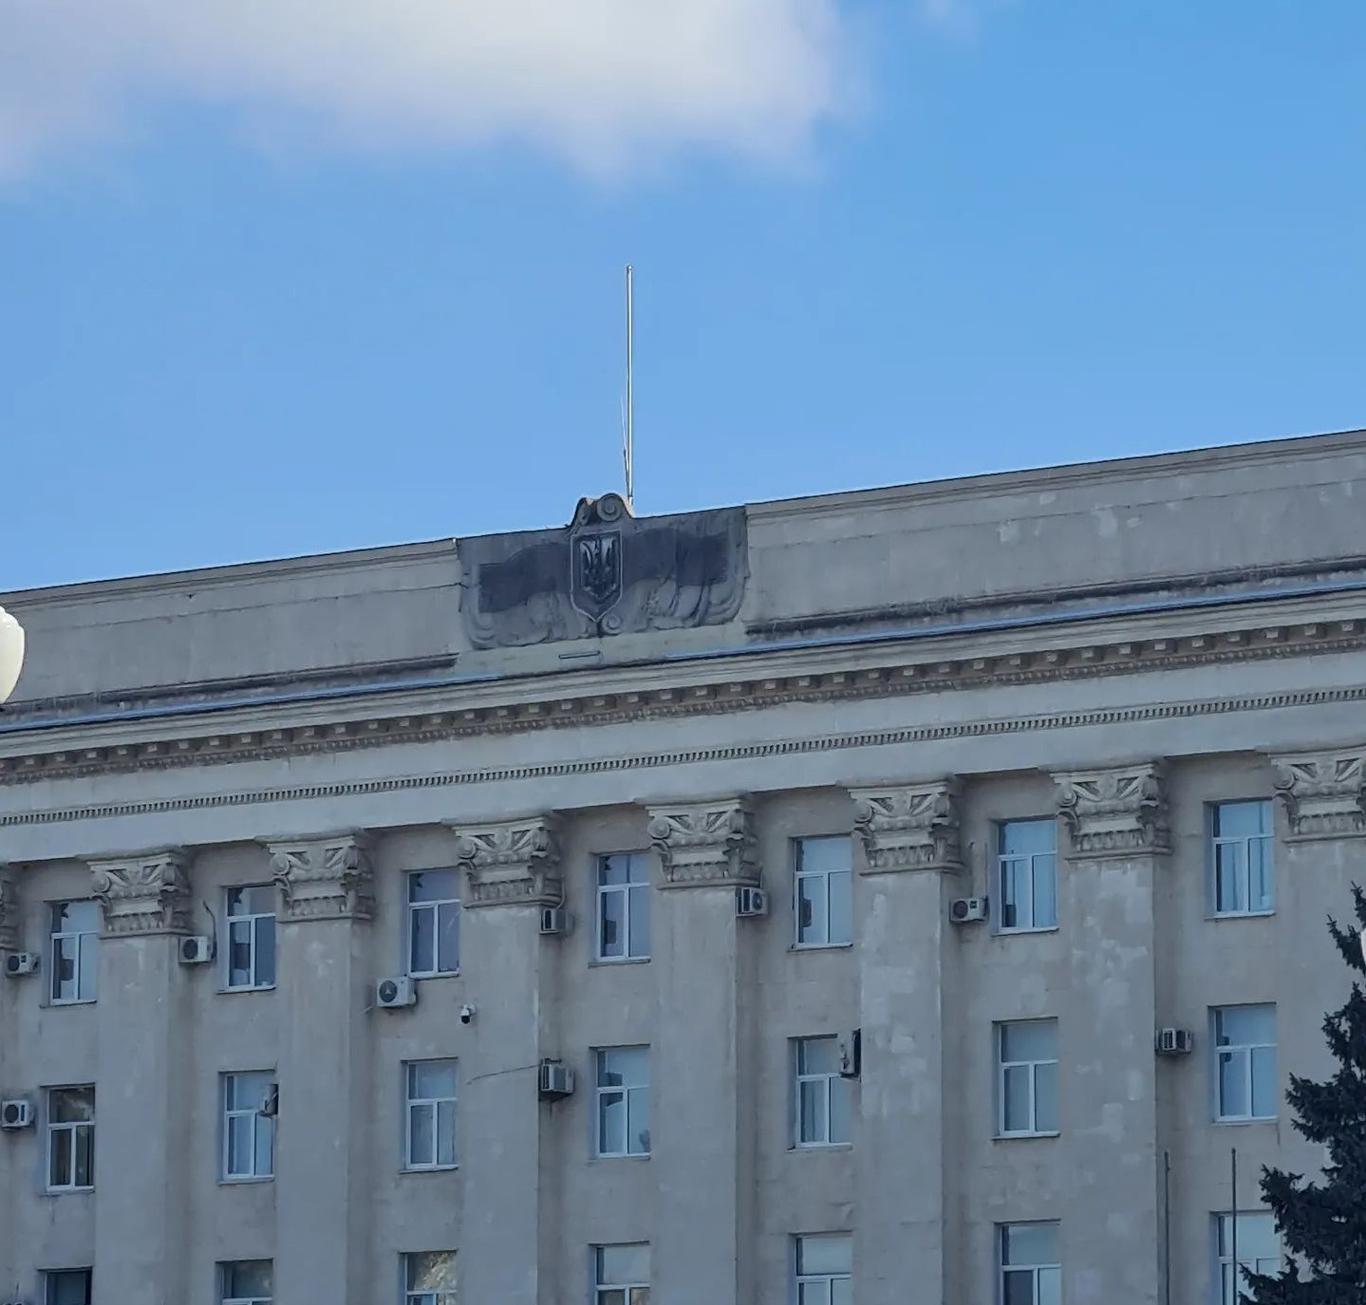 In Kherson occupying forces removed the Ukrainian flag from the regional state administration building